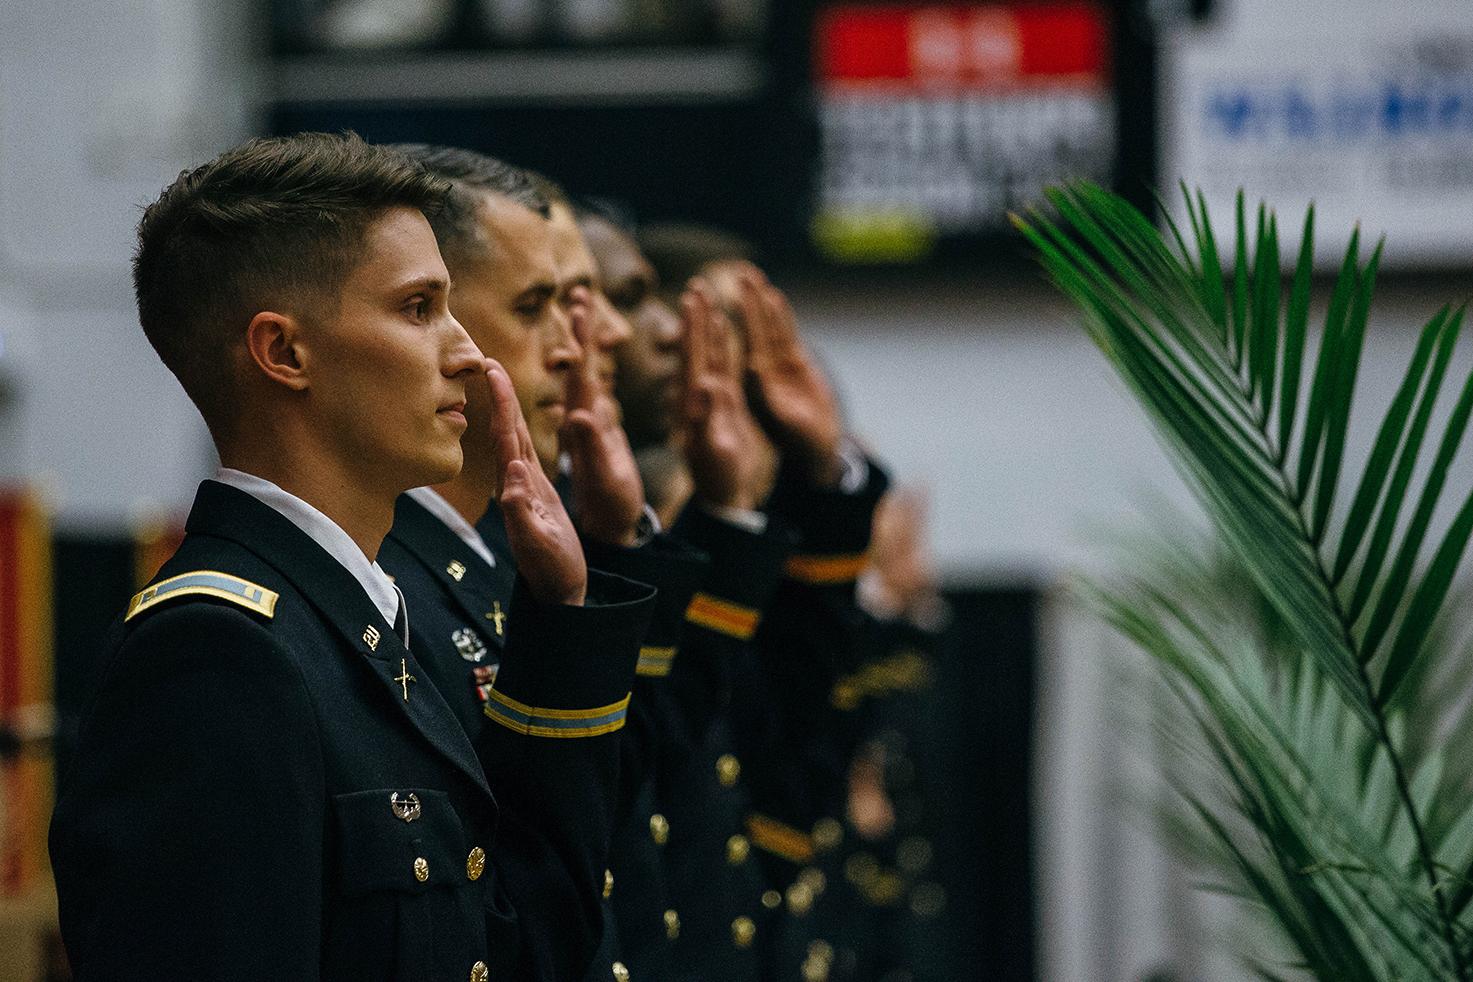 ROTC 学生 being comissioned into the U.S. 军队.